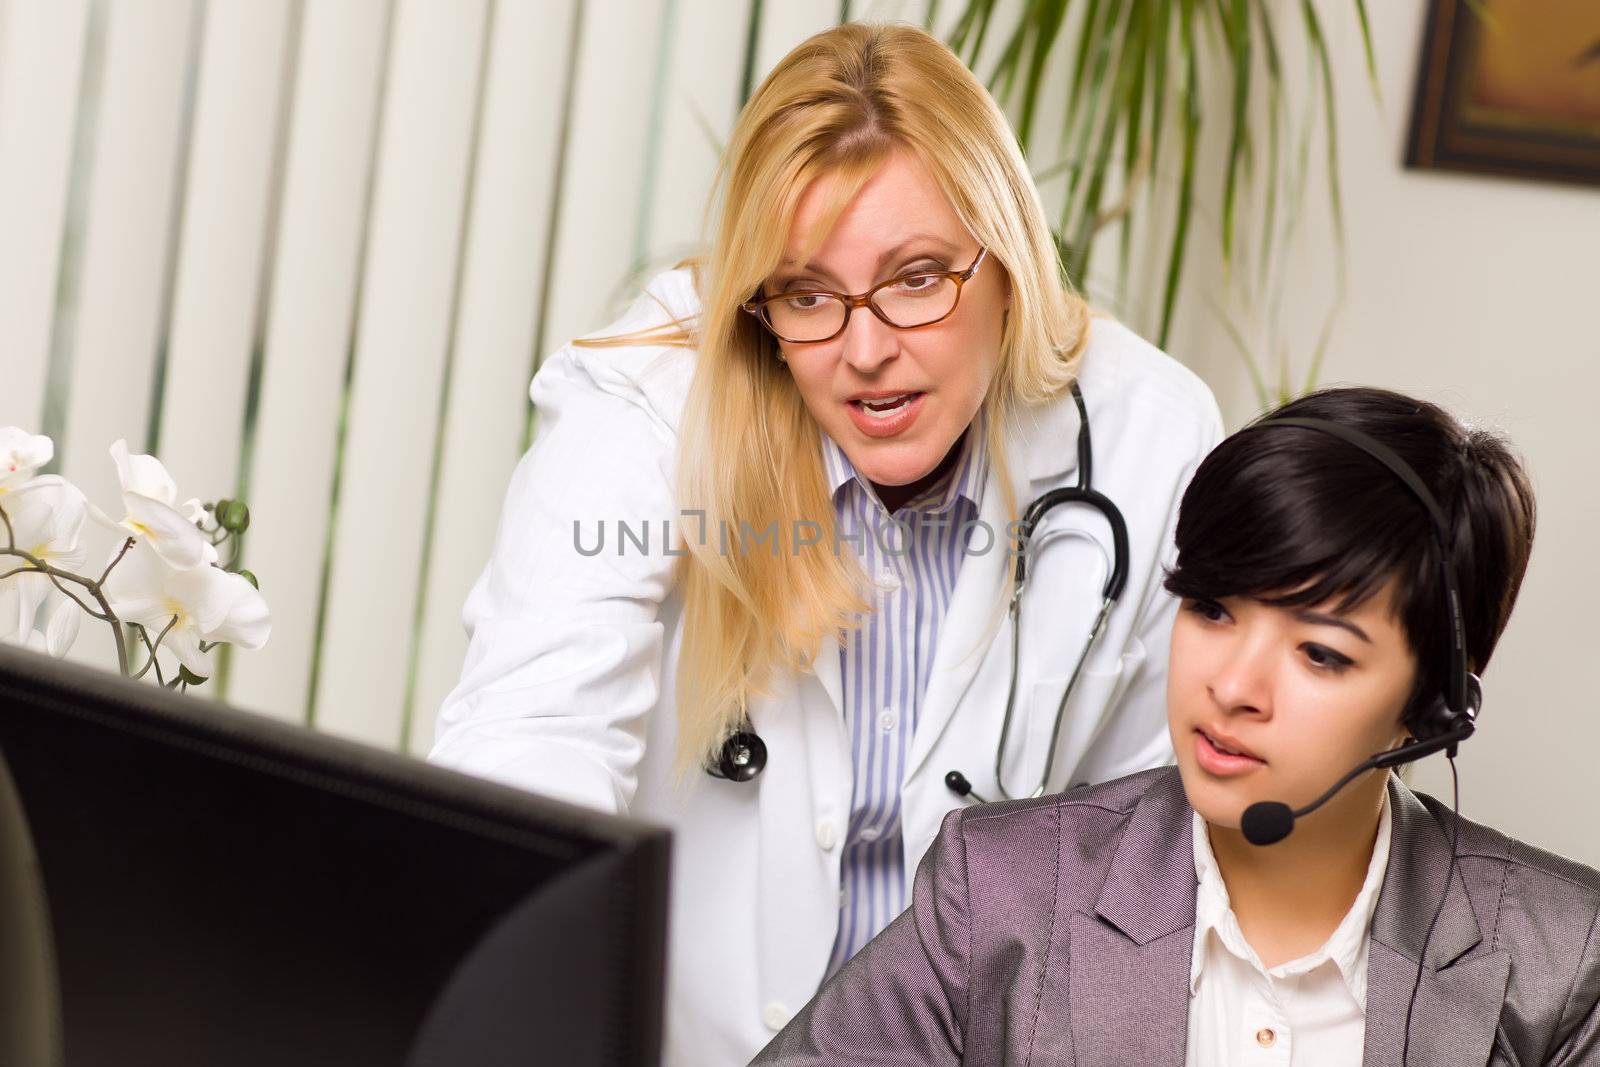 Female Doctor Discusses Work on Computer with Receptionist Assistant in An Office Setting.